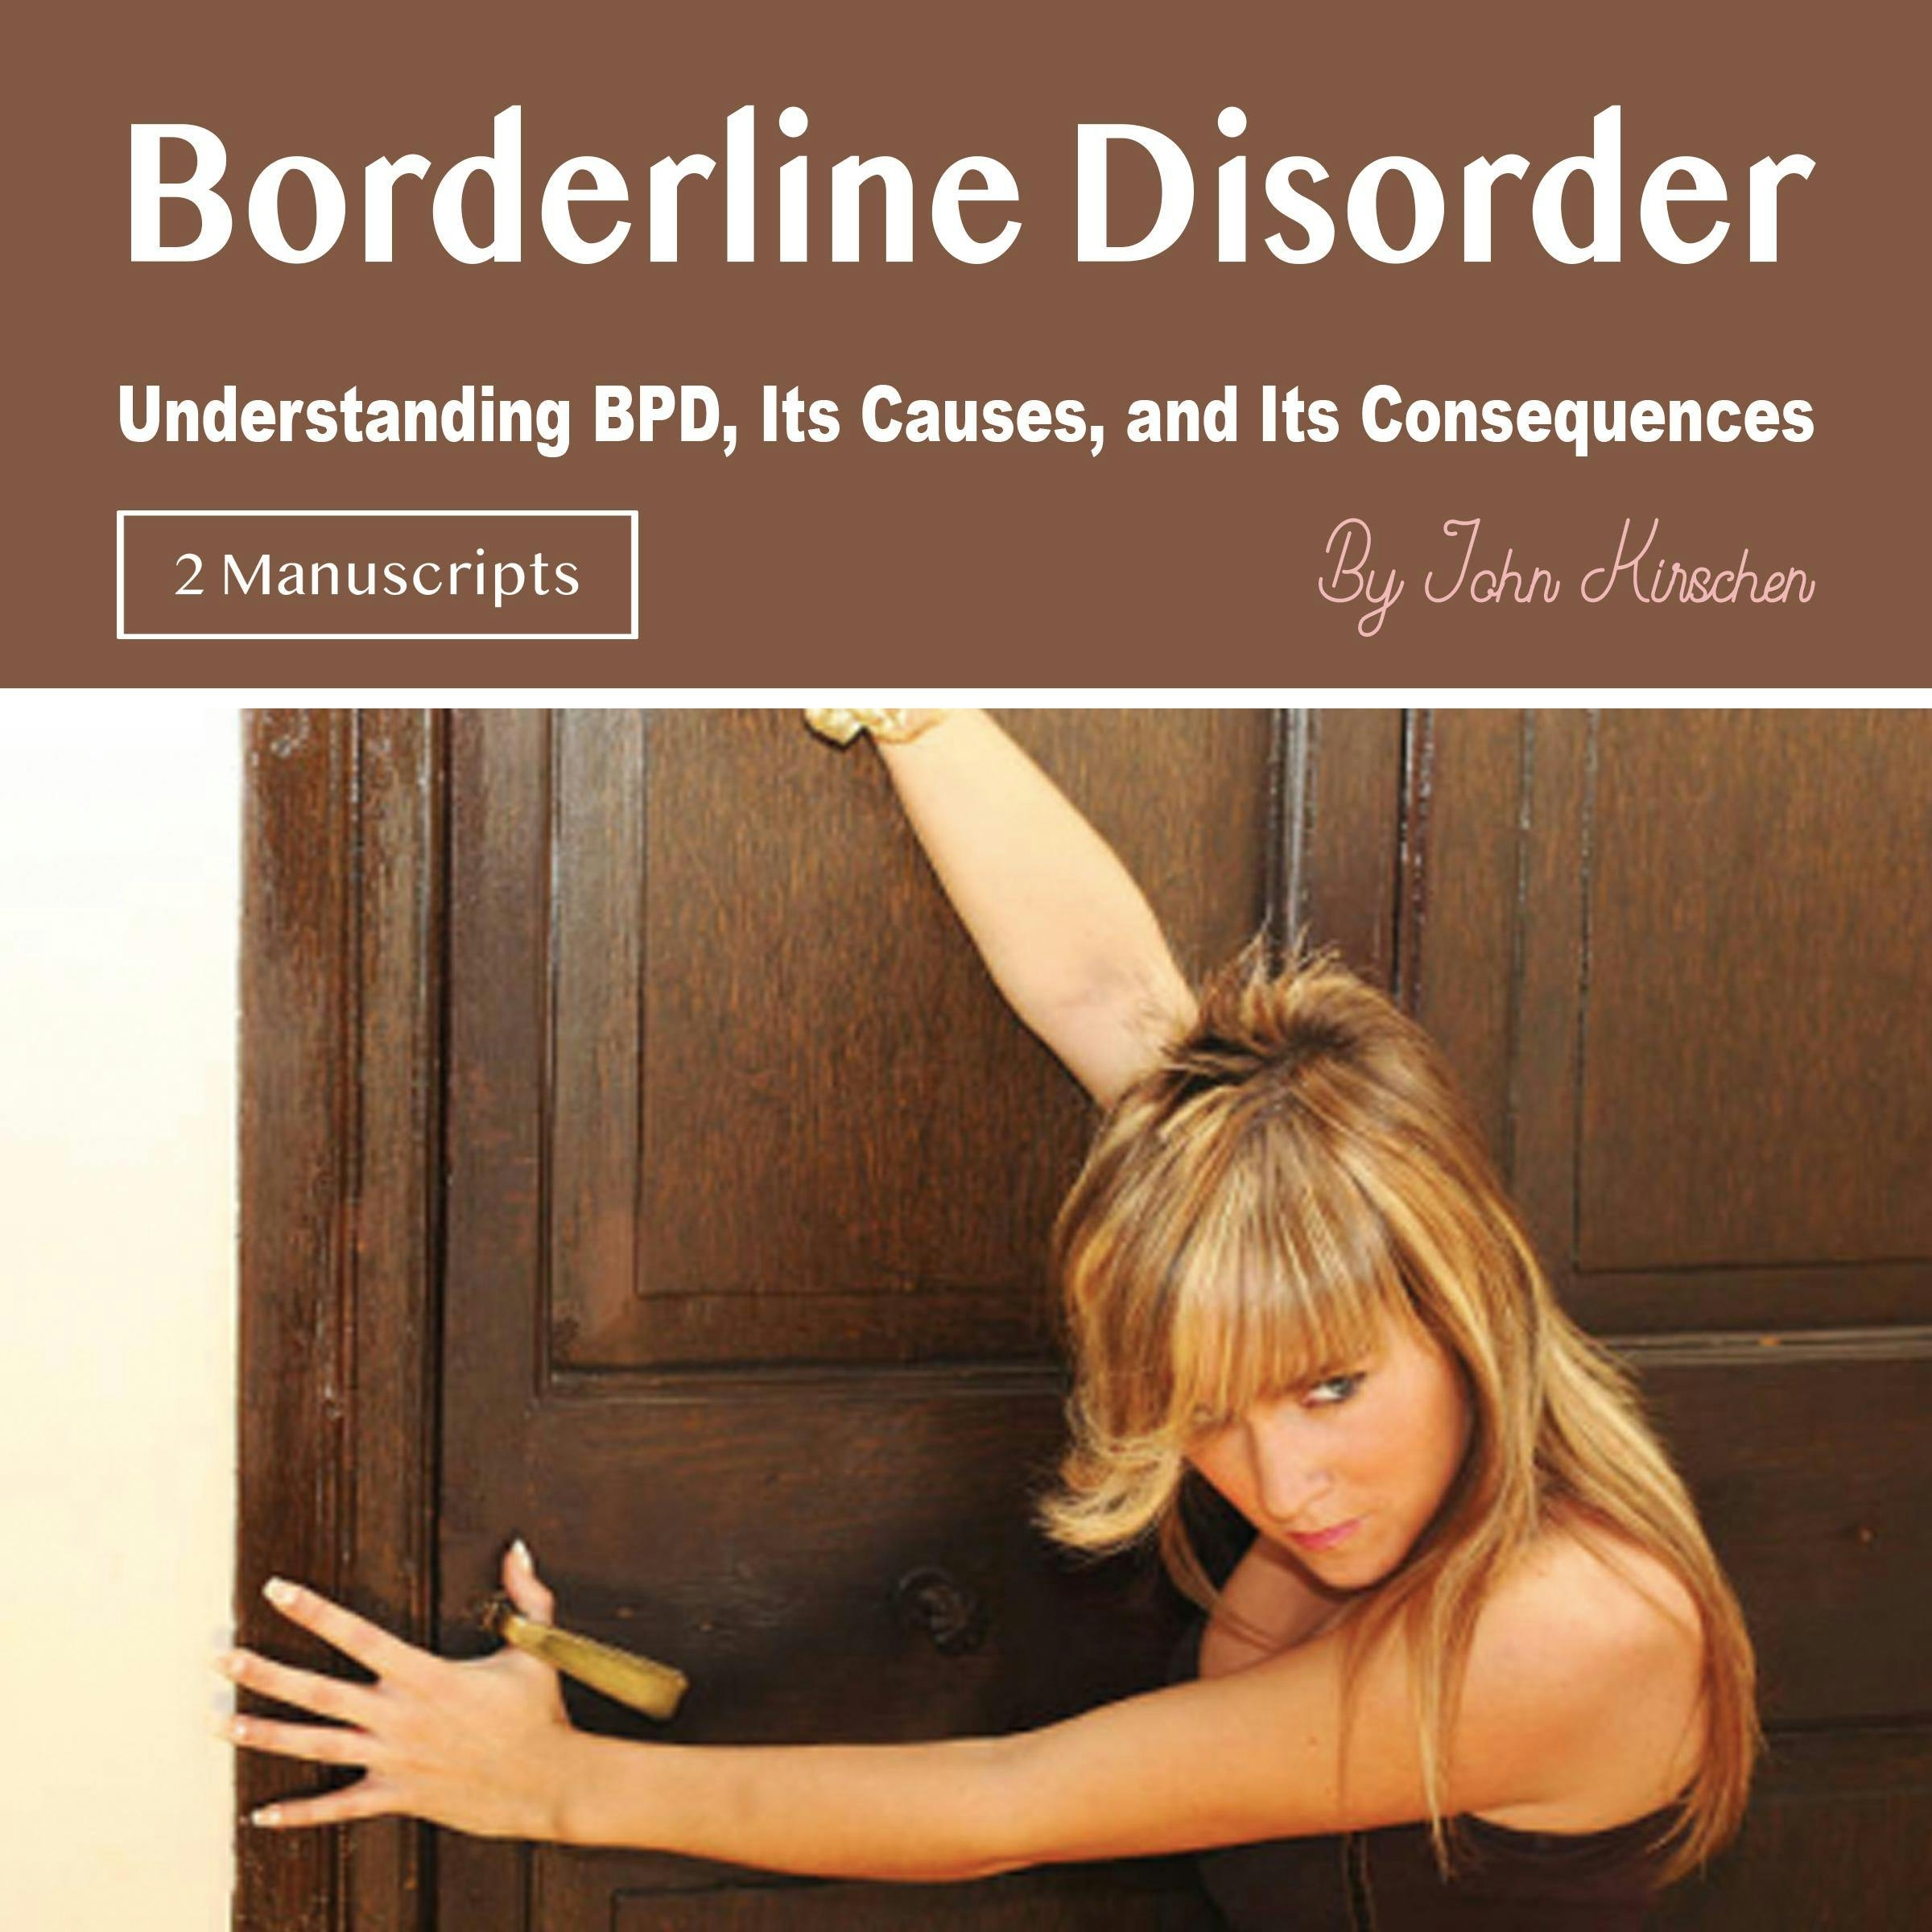 Borderline Disorder: Understanding BPD, Its Causes, and Its Consequences - John Kirschen